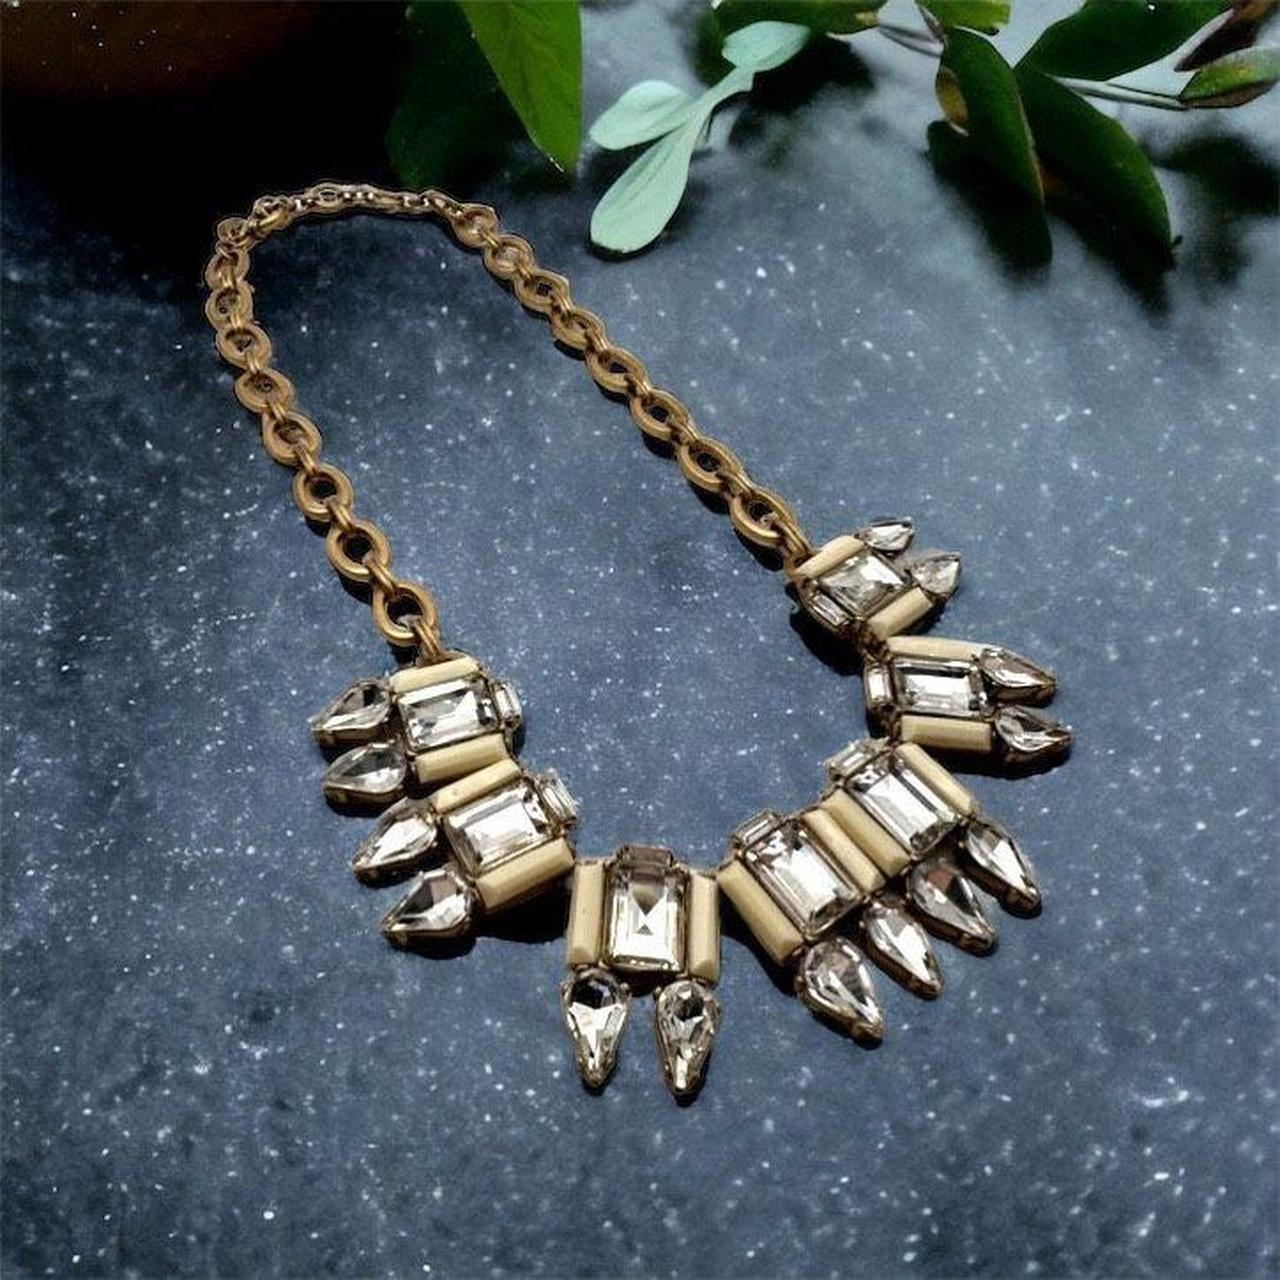 J Crew Gold Toned Crystal Statement 20 In. Necklace And Bracelet | eBay